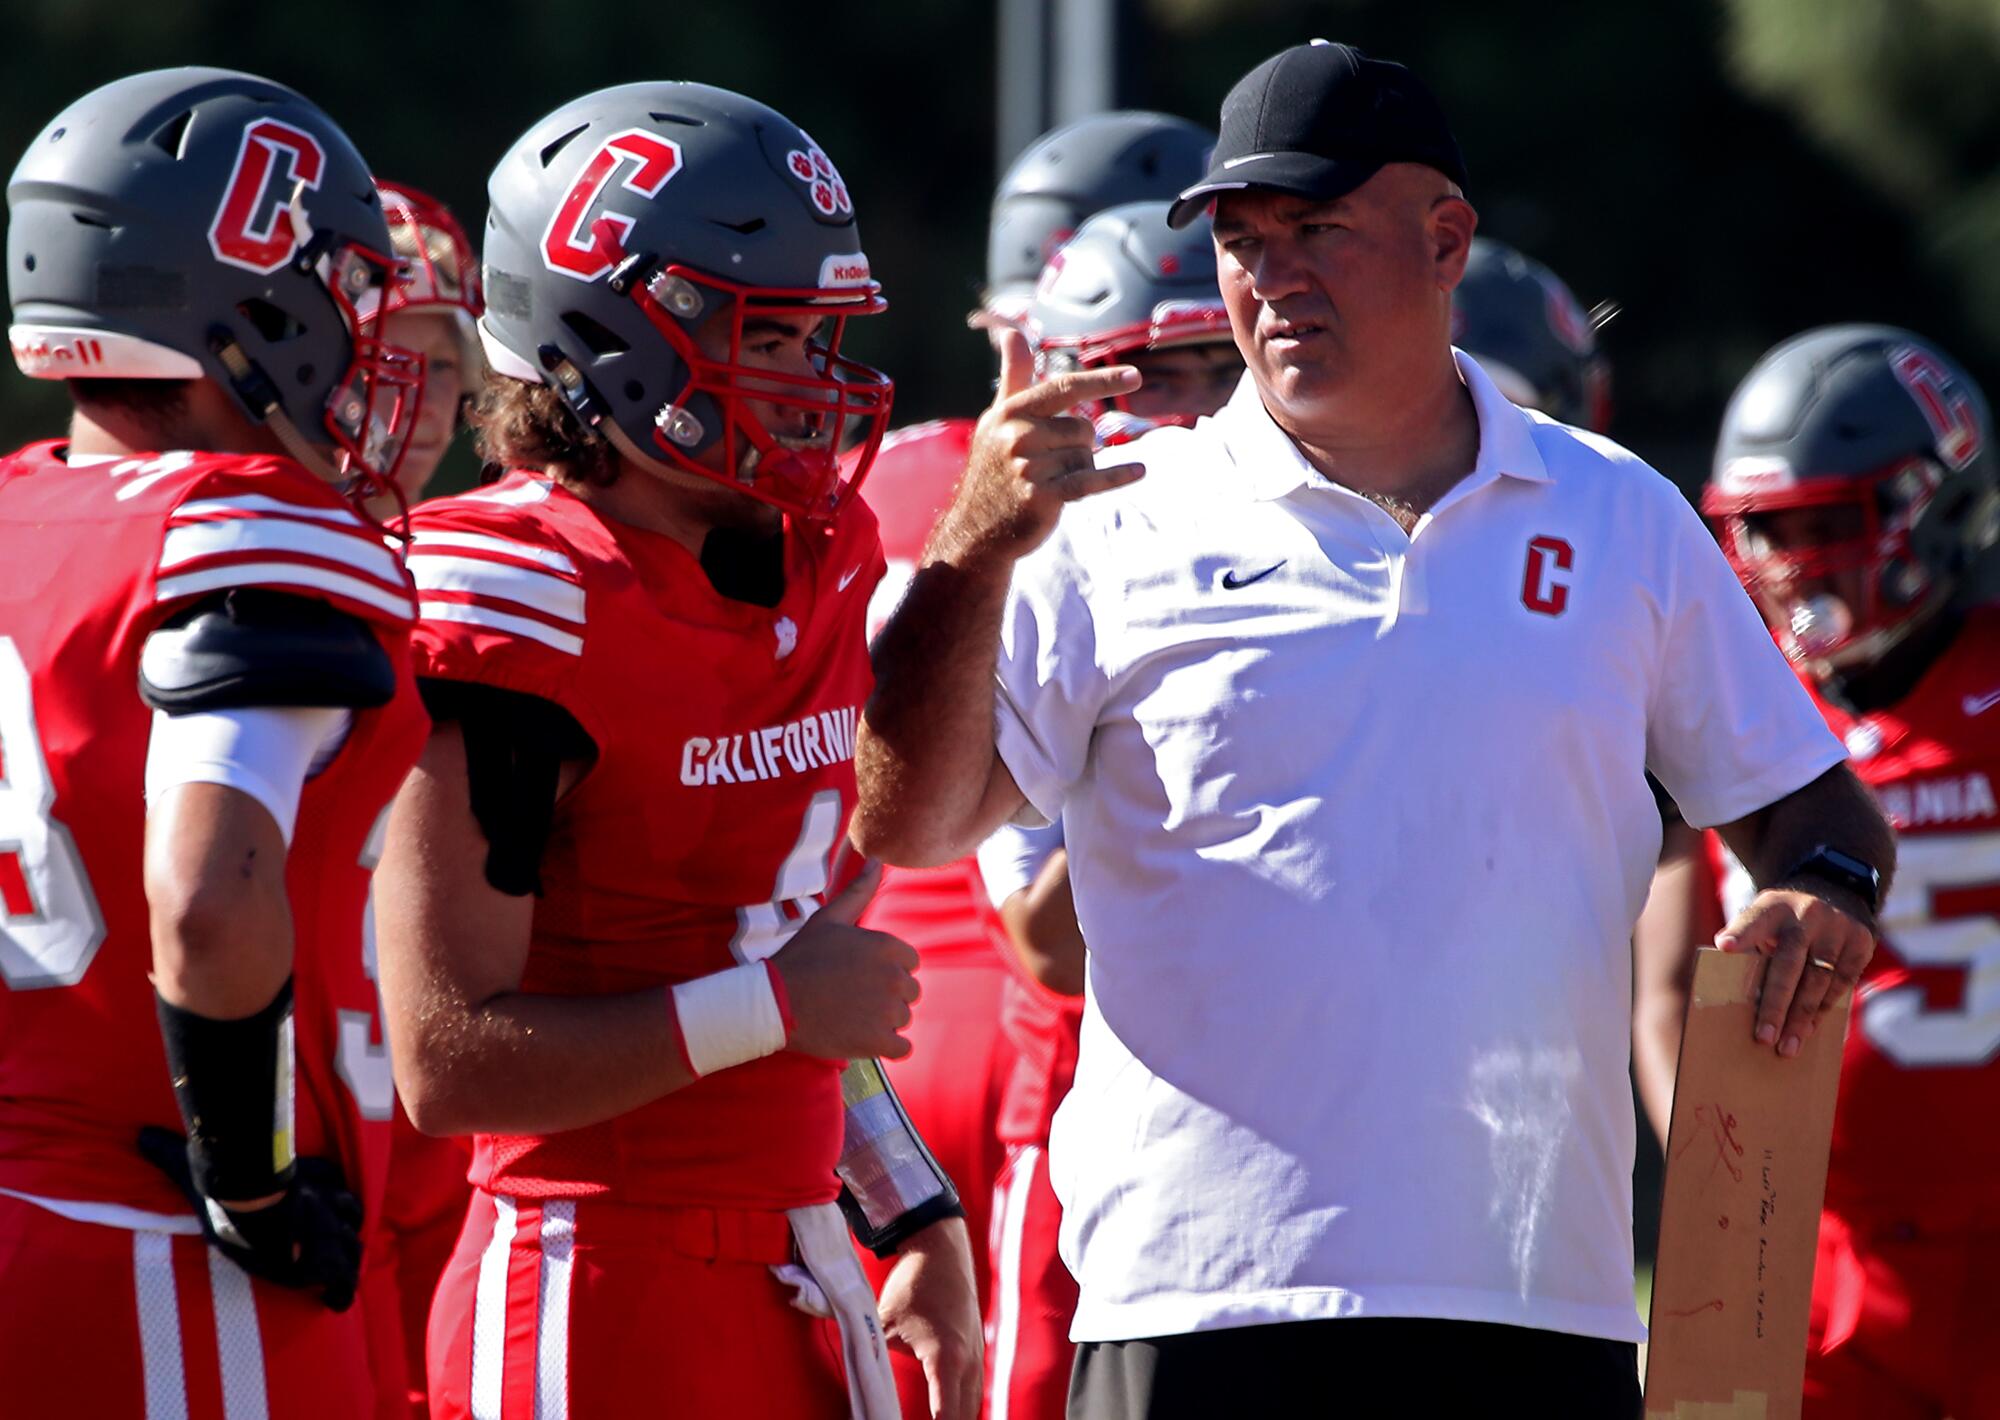 CSDR football coach Keith Adams communicates with his players in sign language during a game.